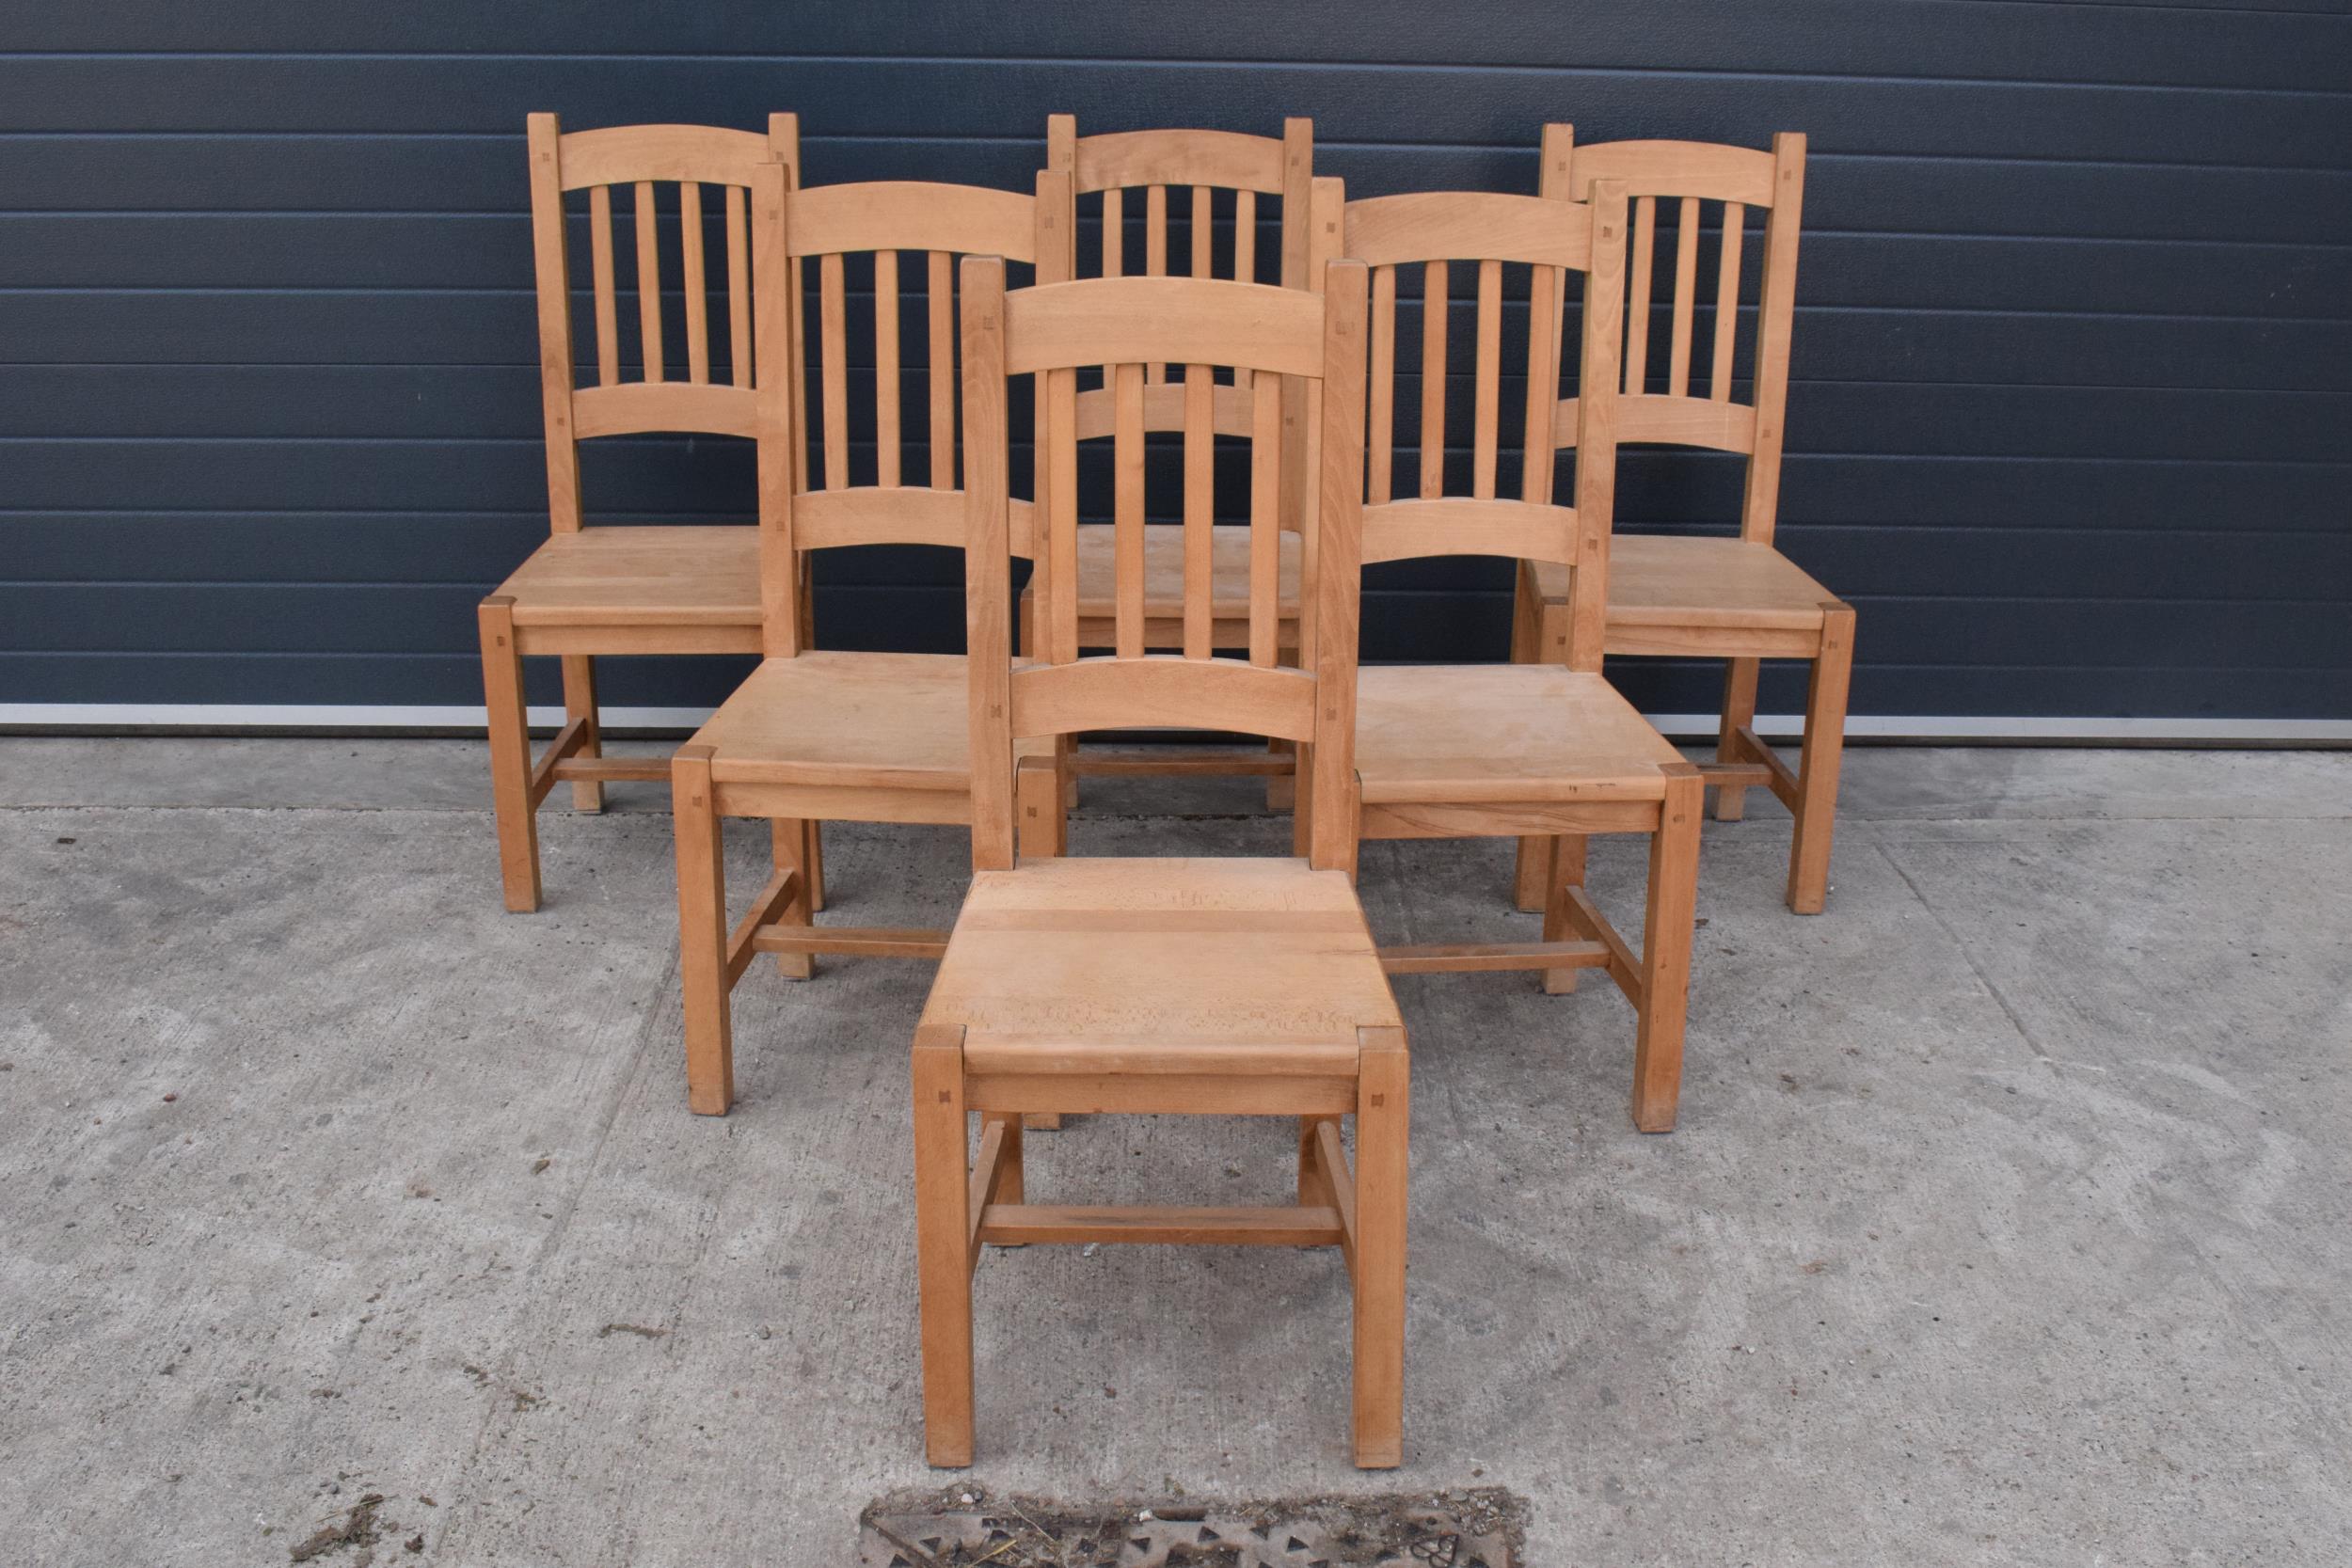 A set of 6 modern / 20th century hardwood farmhouse kitchen chairs (6). 108cm tall. In good